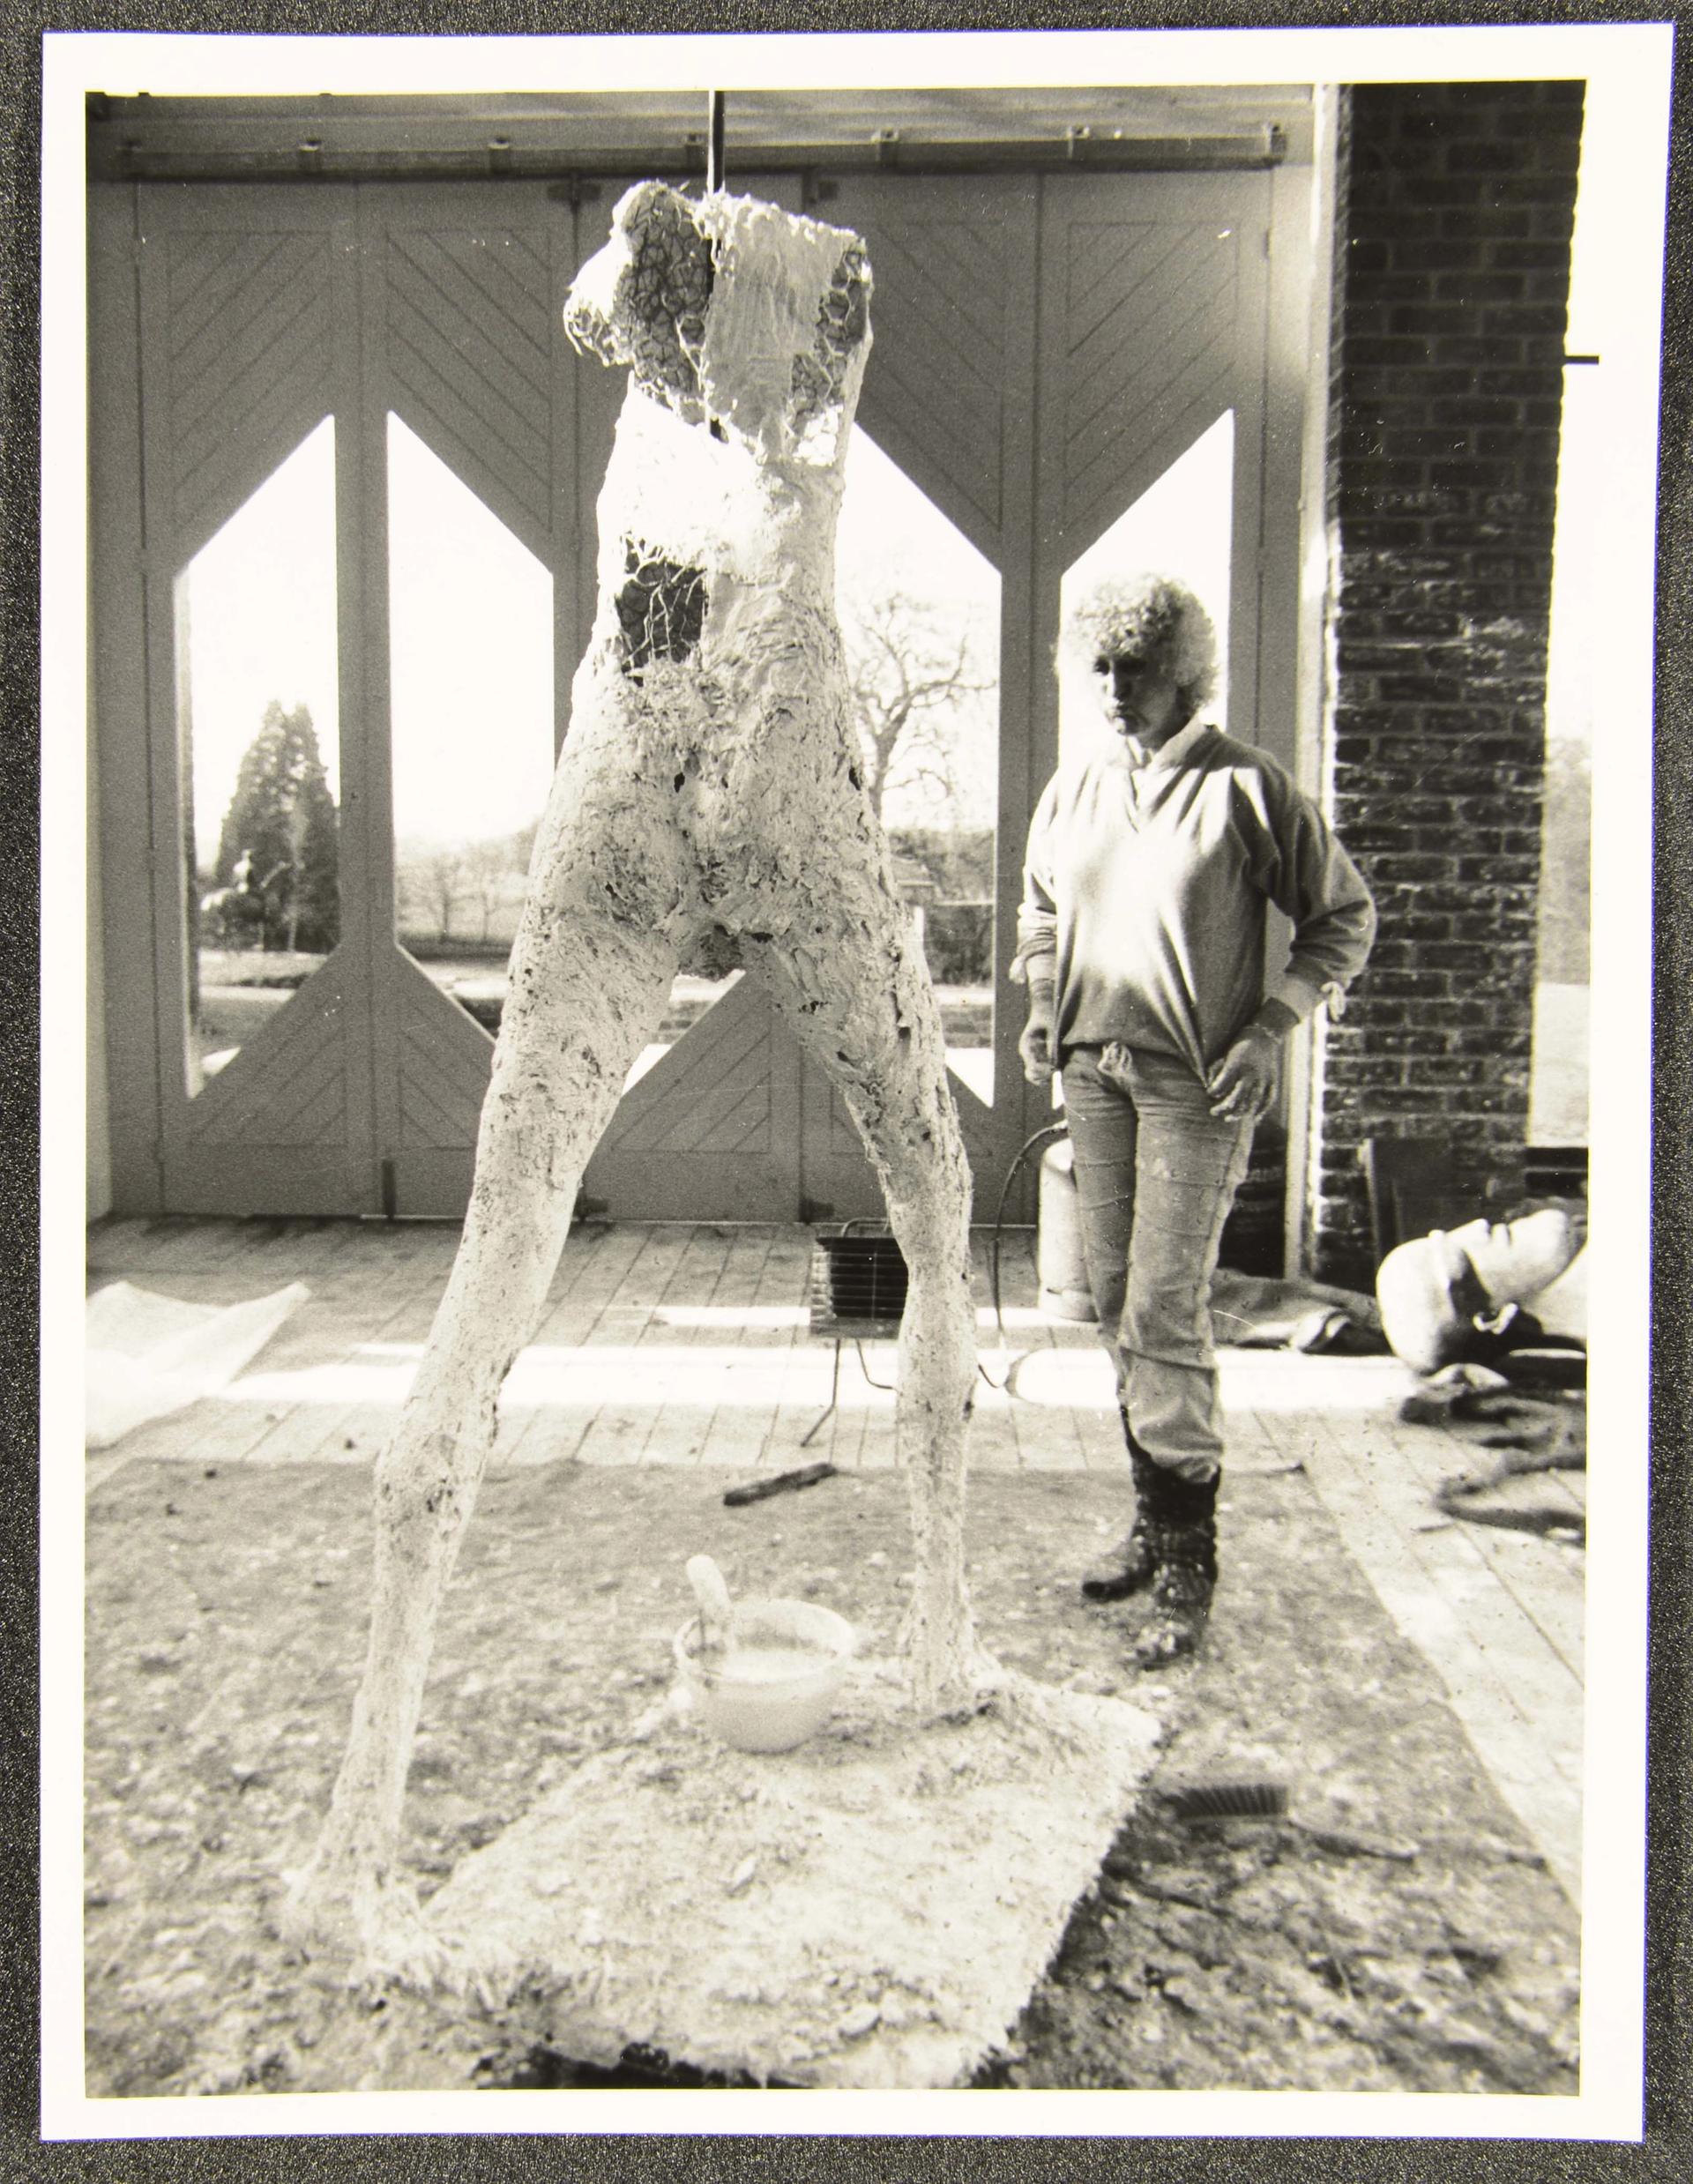 Elisabeth Frink working on Running Man in her studio at Woolland All images held within the Frink archive at Dorset History Centre